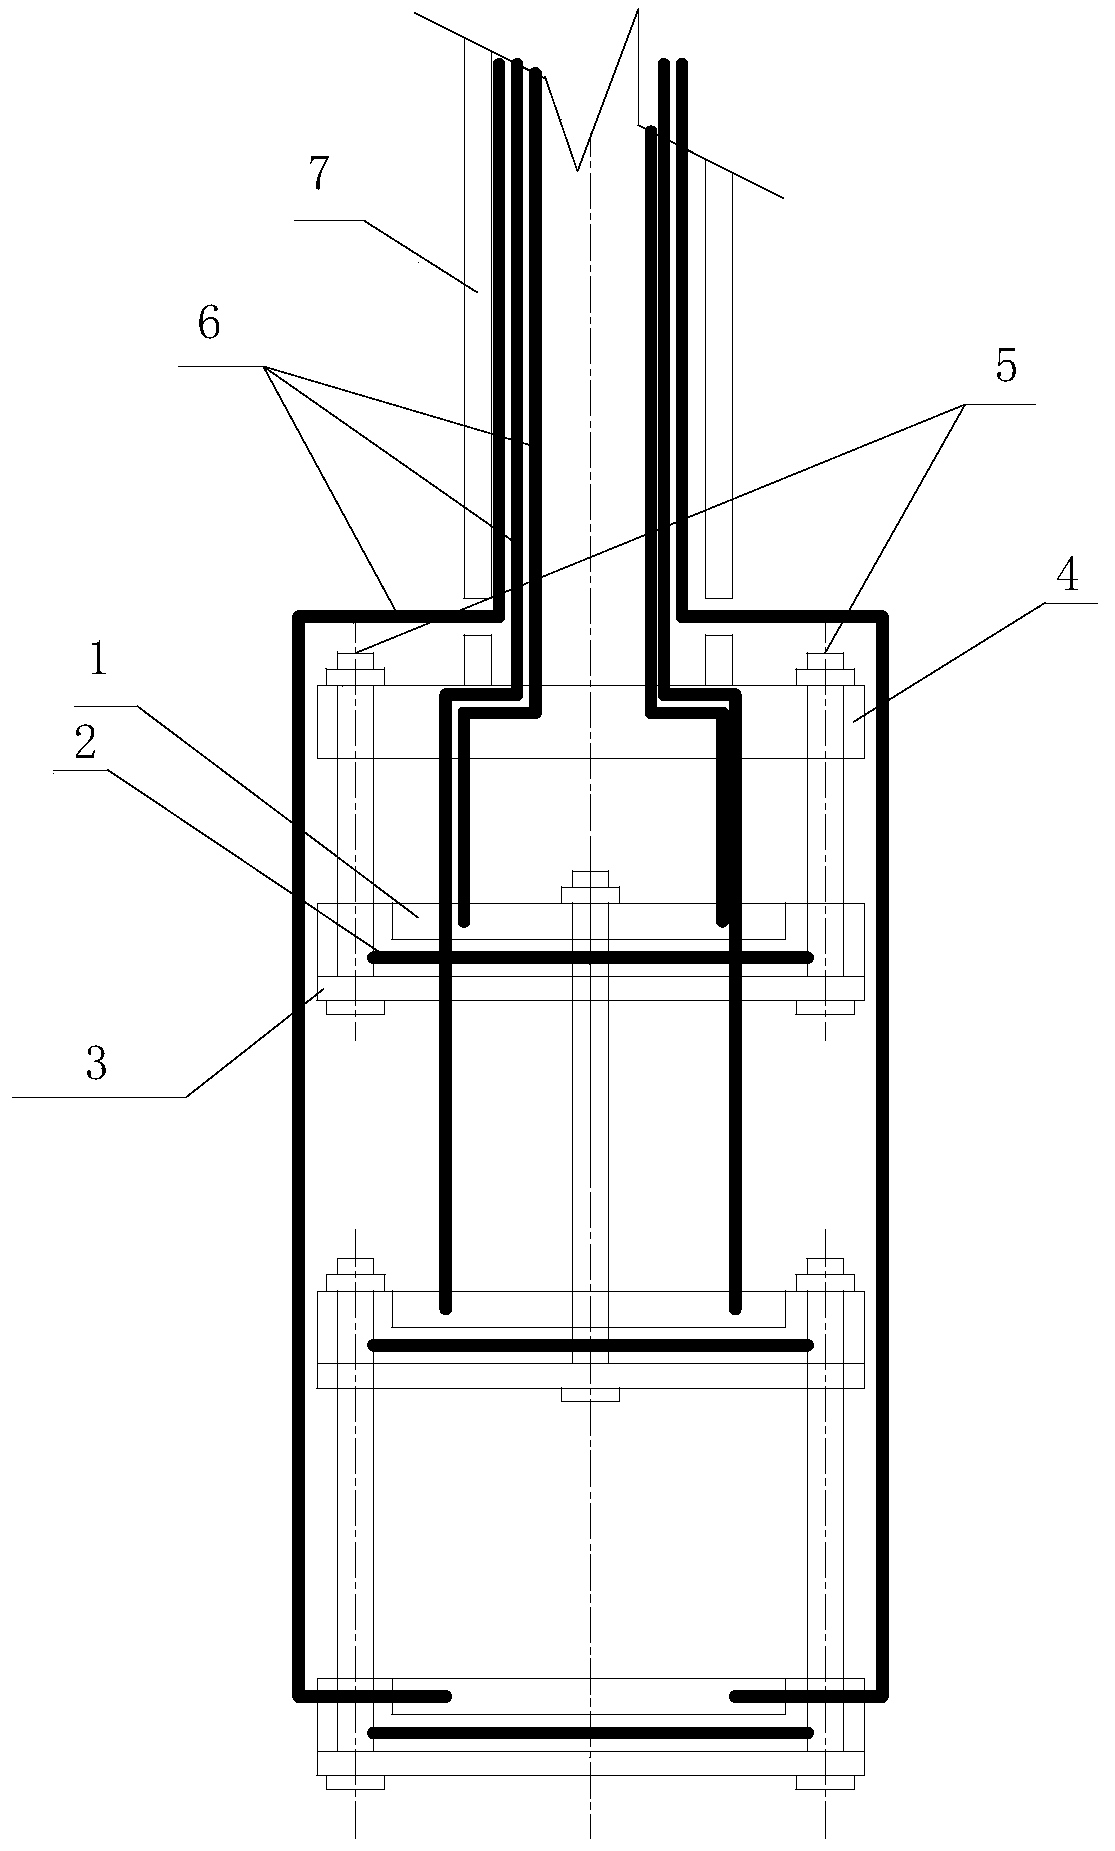 A filter material swelling degree measuring system